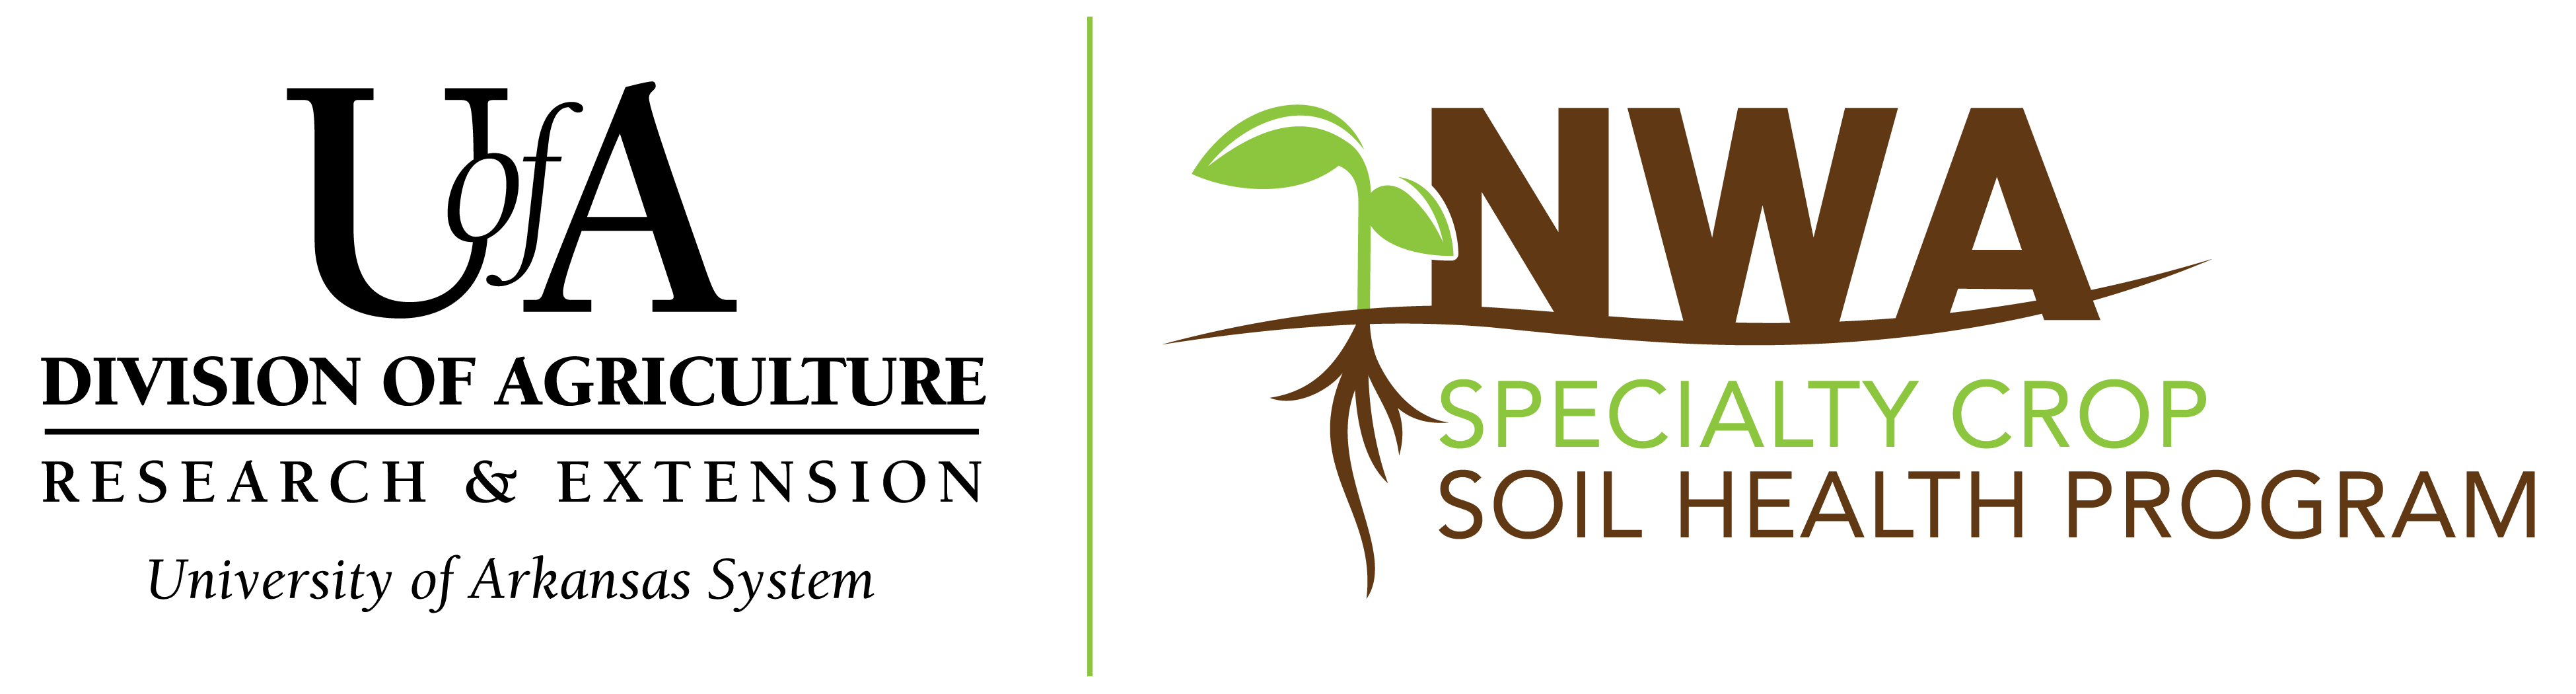 Logos for the University of Arkansas System Division of Agriculture and Northwest Arkansas Specialty Crop Soil Health Program